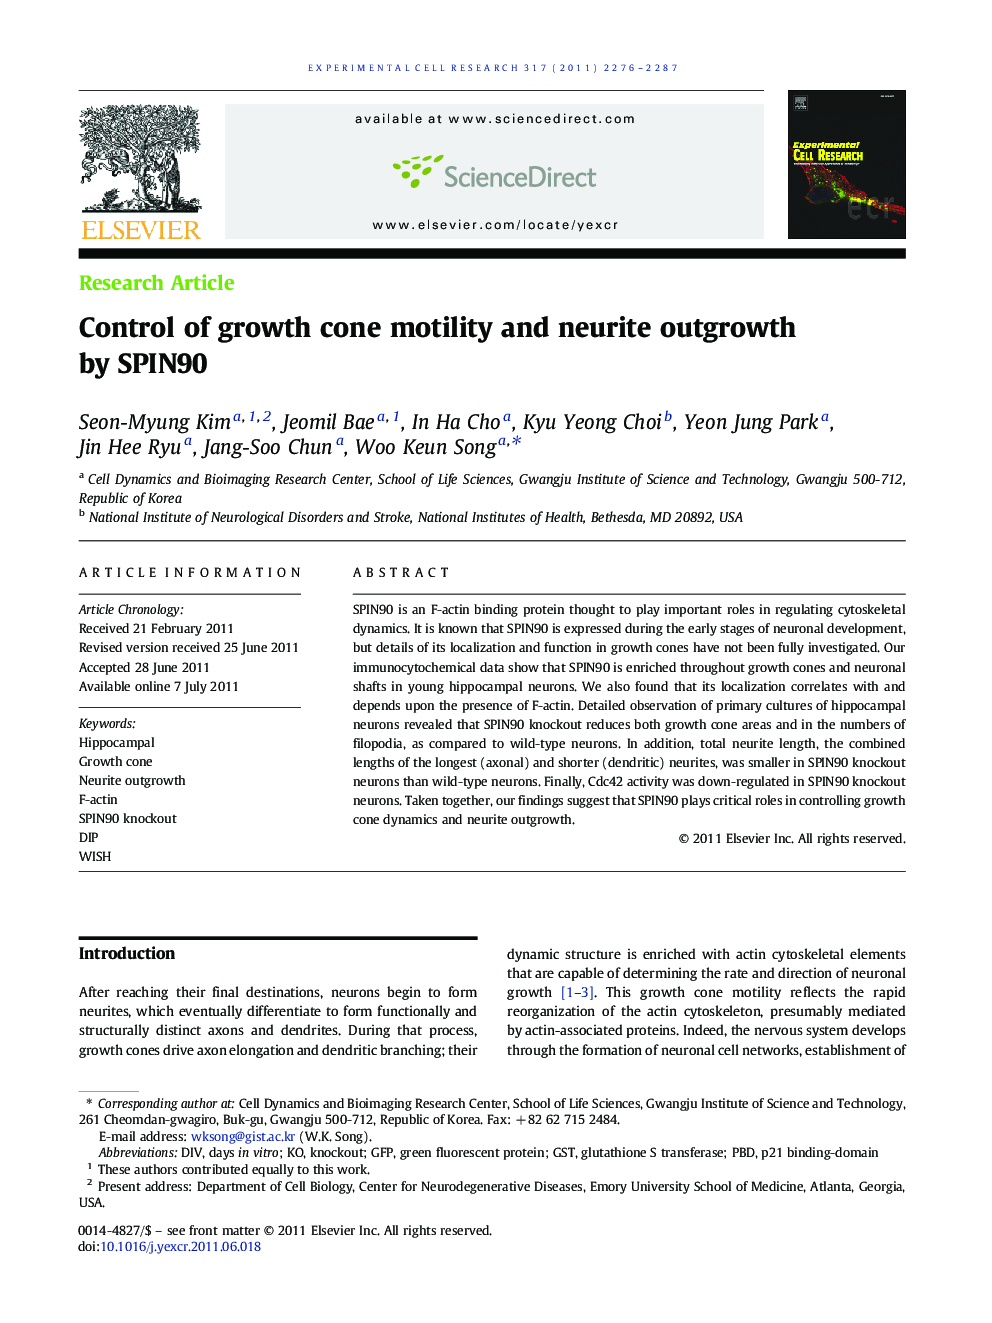 Control of growth cone motility and neurite outgrowth by SPIN90